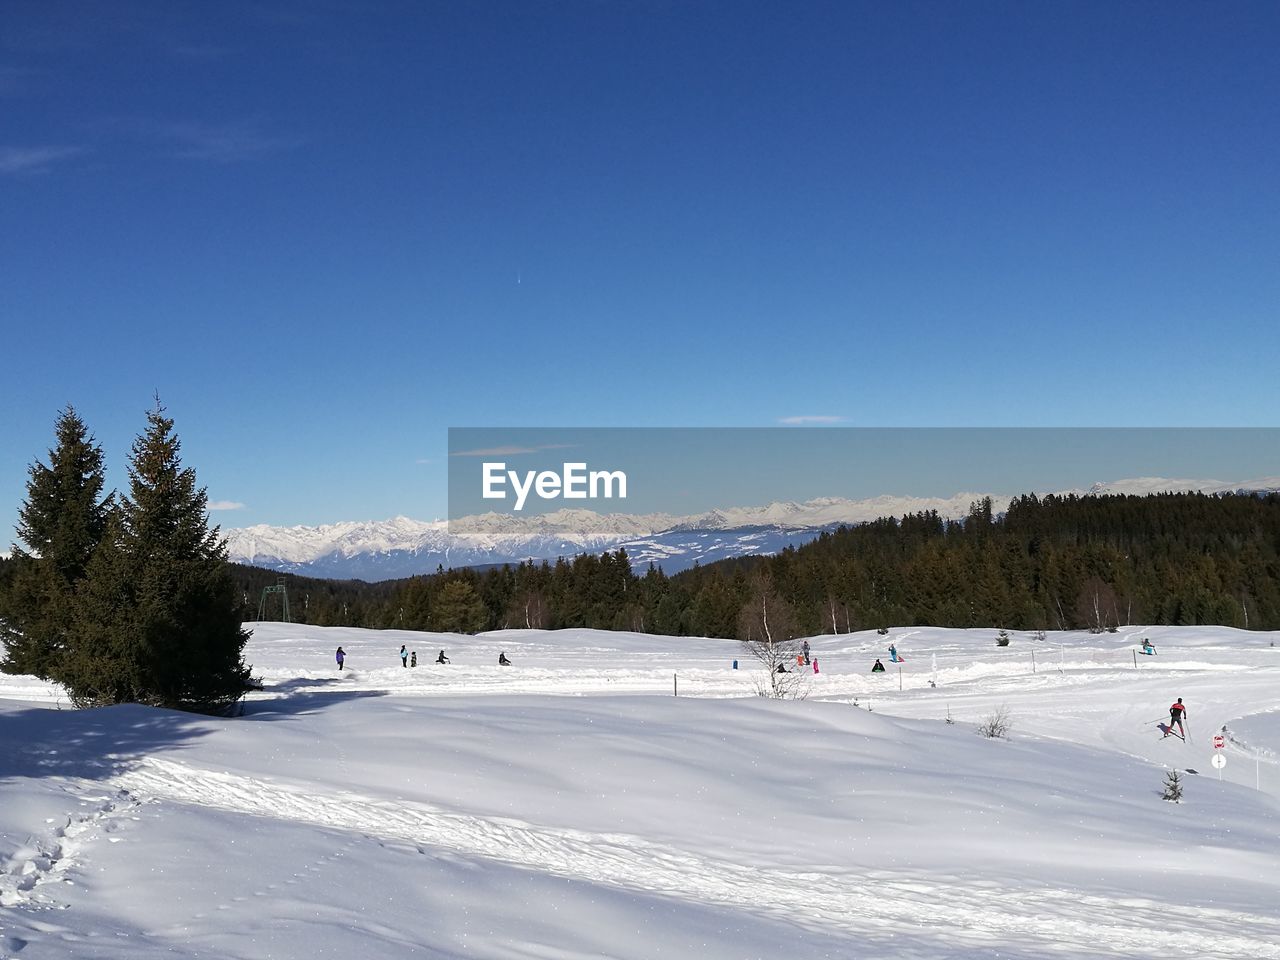 VIEW OF SKI LIFT AGAINST CLEAR SKY